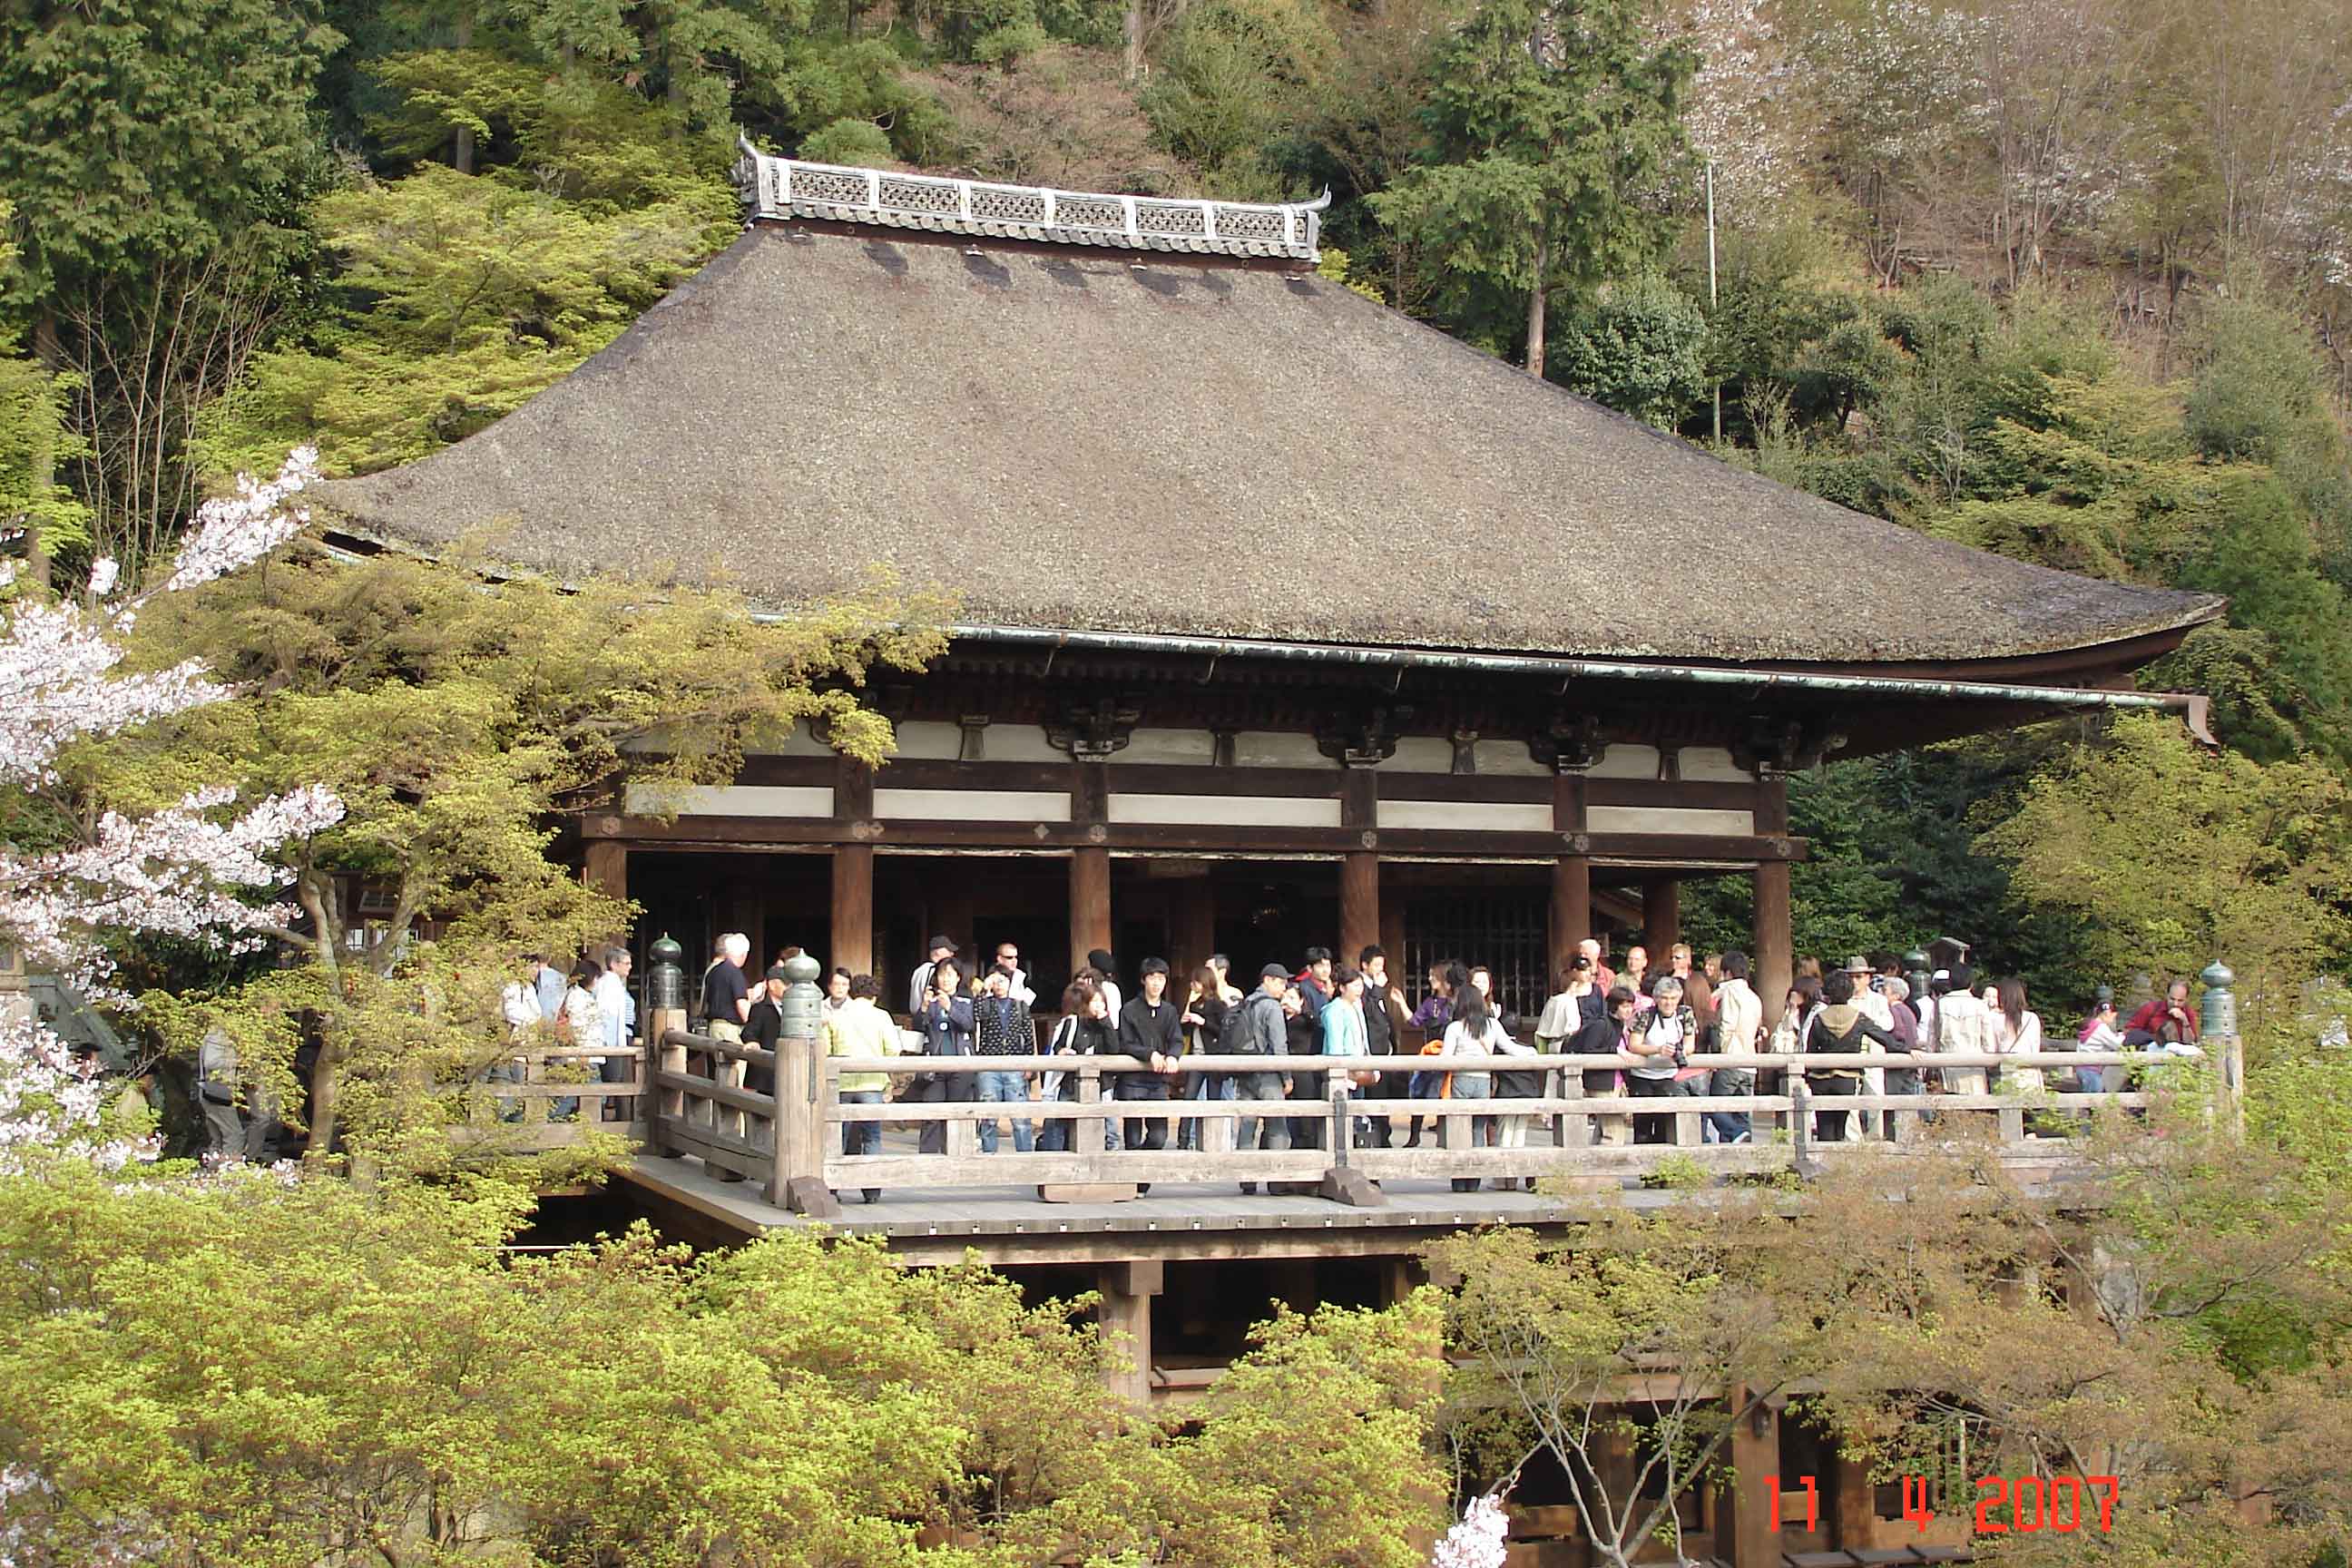 Kiyomizu-Temple - veranda or stage overlooking the temple grounds and city